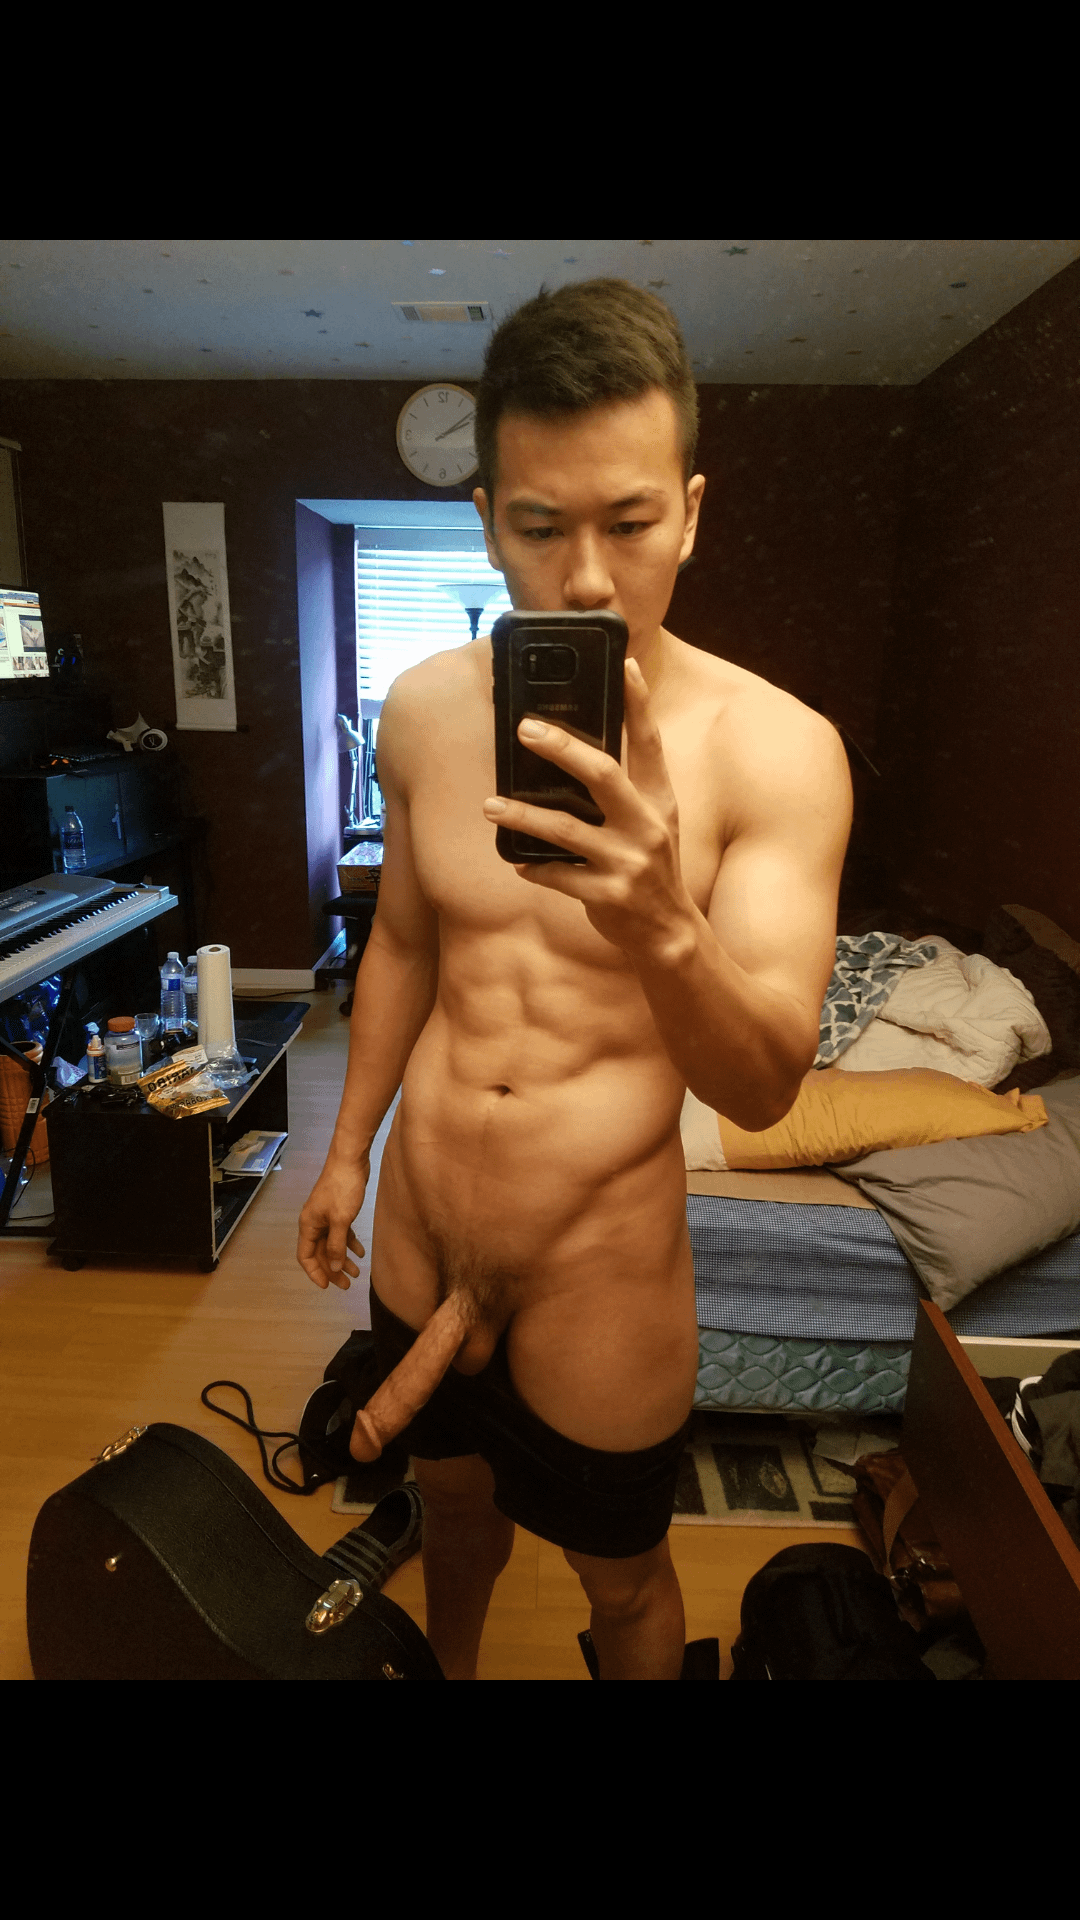 best of Doing and flexing crunches abs